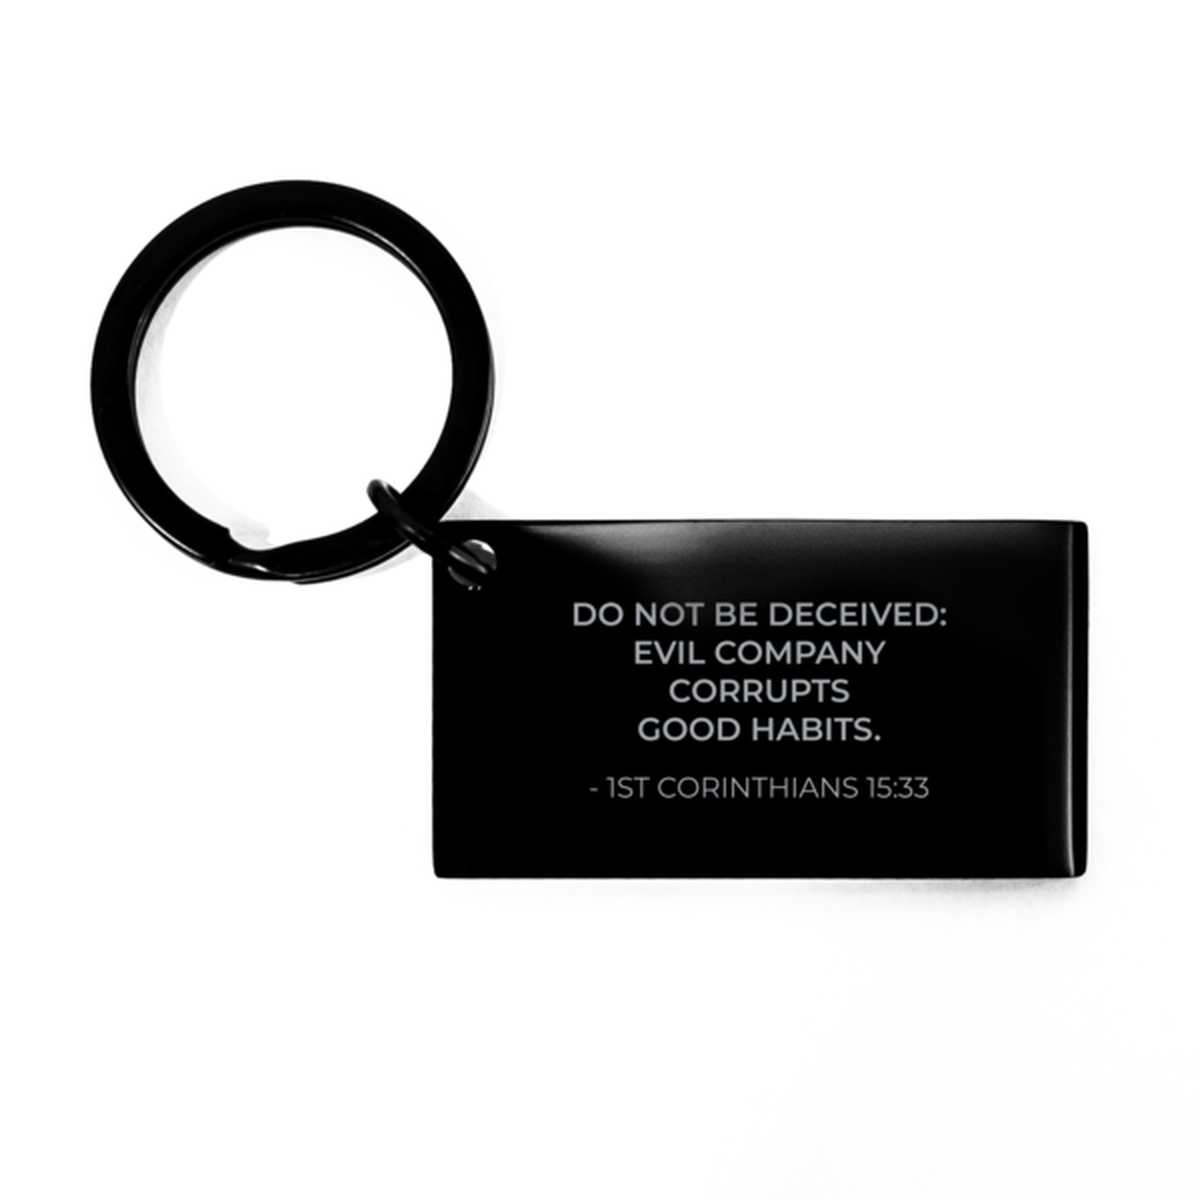 Bible Verse Black Keychain, 1St Corinthians 15:33 Do Not Be Deceived: Evil Company, Christian Inspirational Key Ring Gifts For Men Women